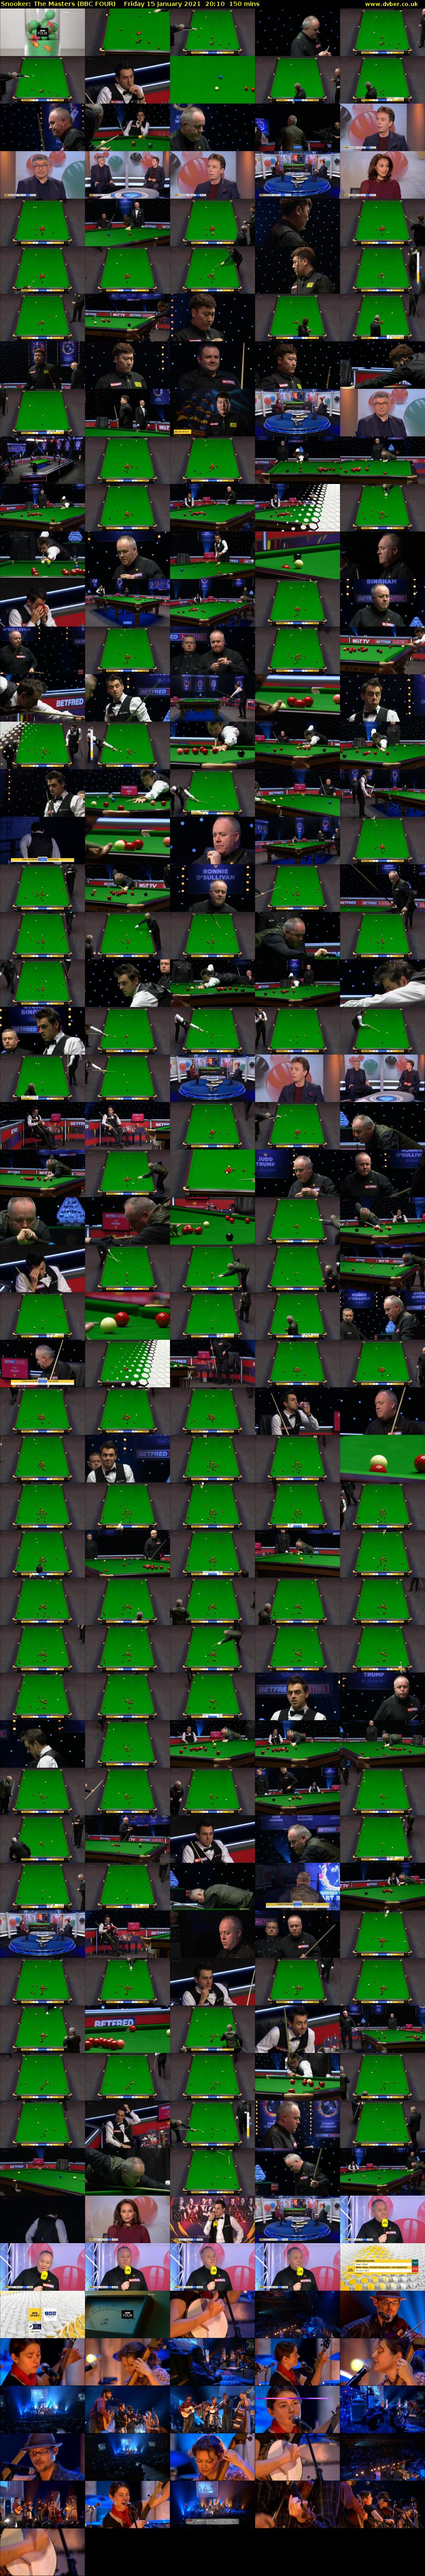 Snooker: The Masters (BBC FOUR) Friday 15 January 2021 20:10 - 22:40